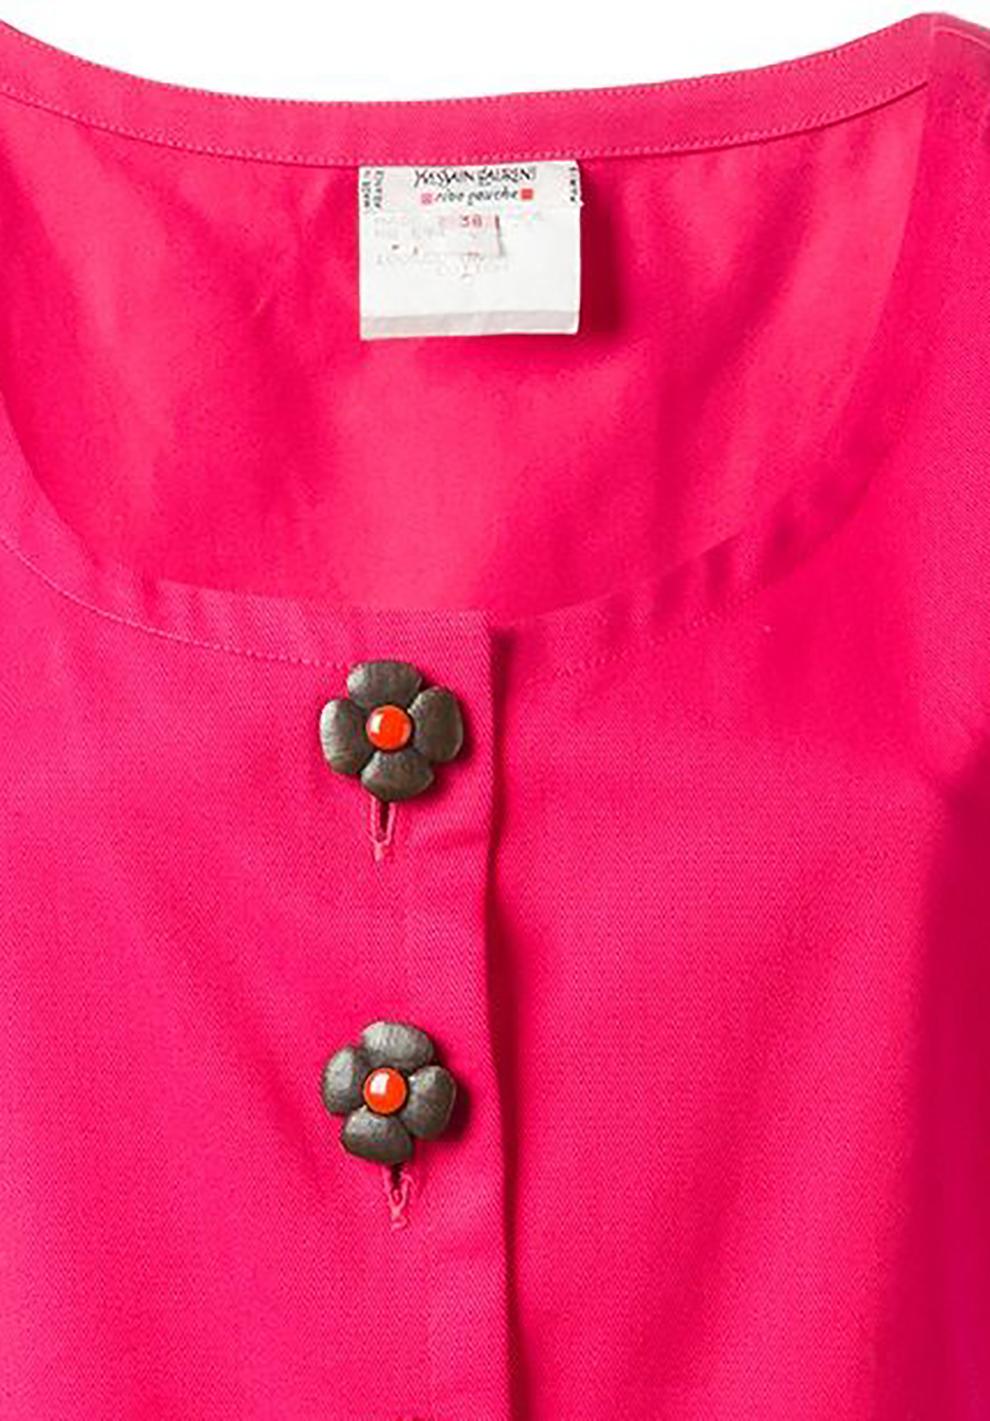 Yves Saint Laurent Red Pink Top 1